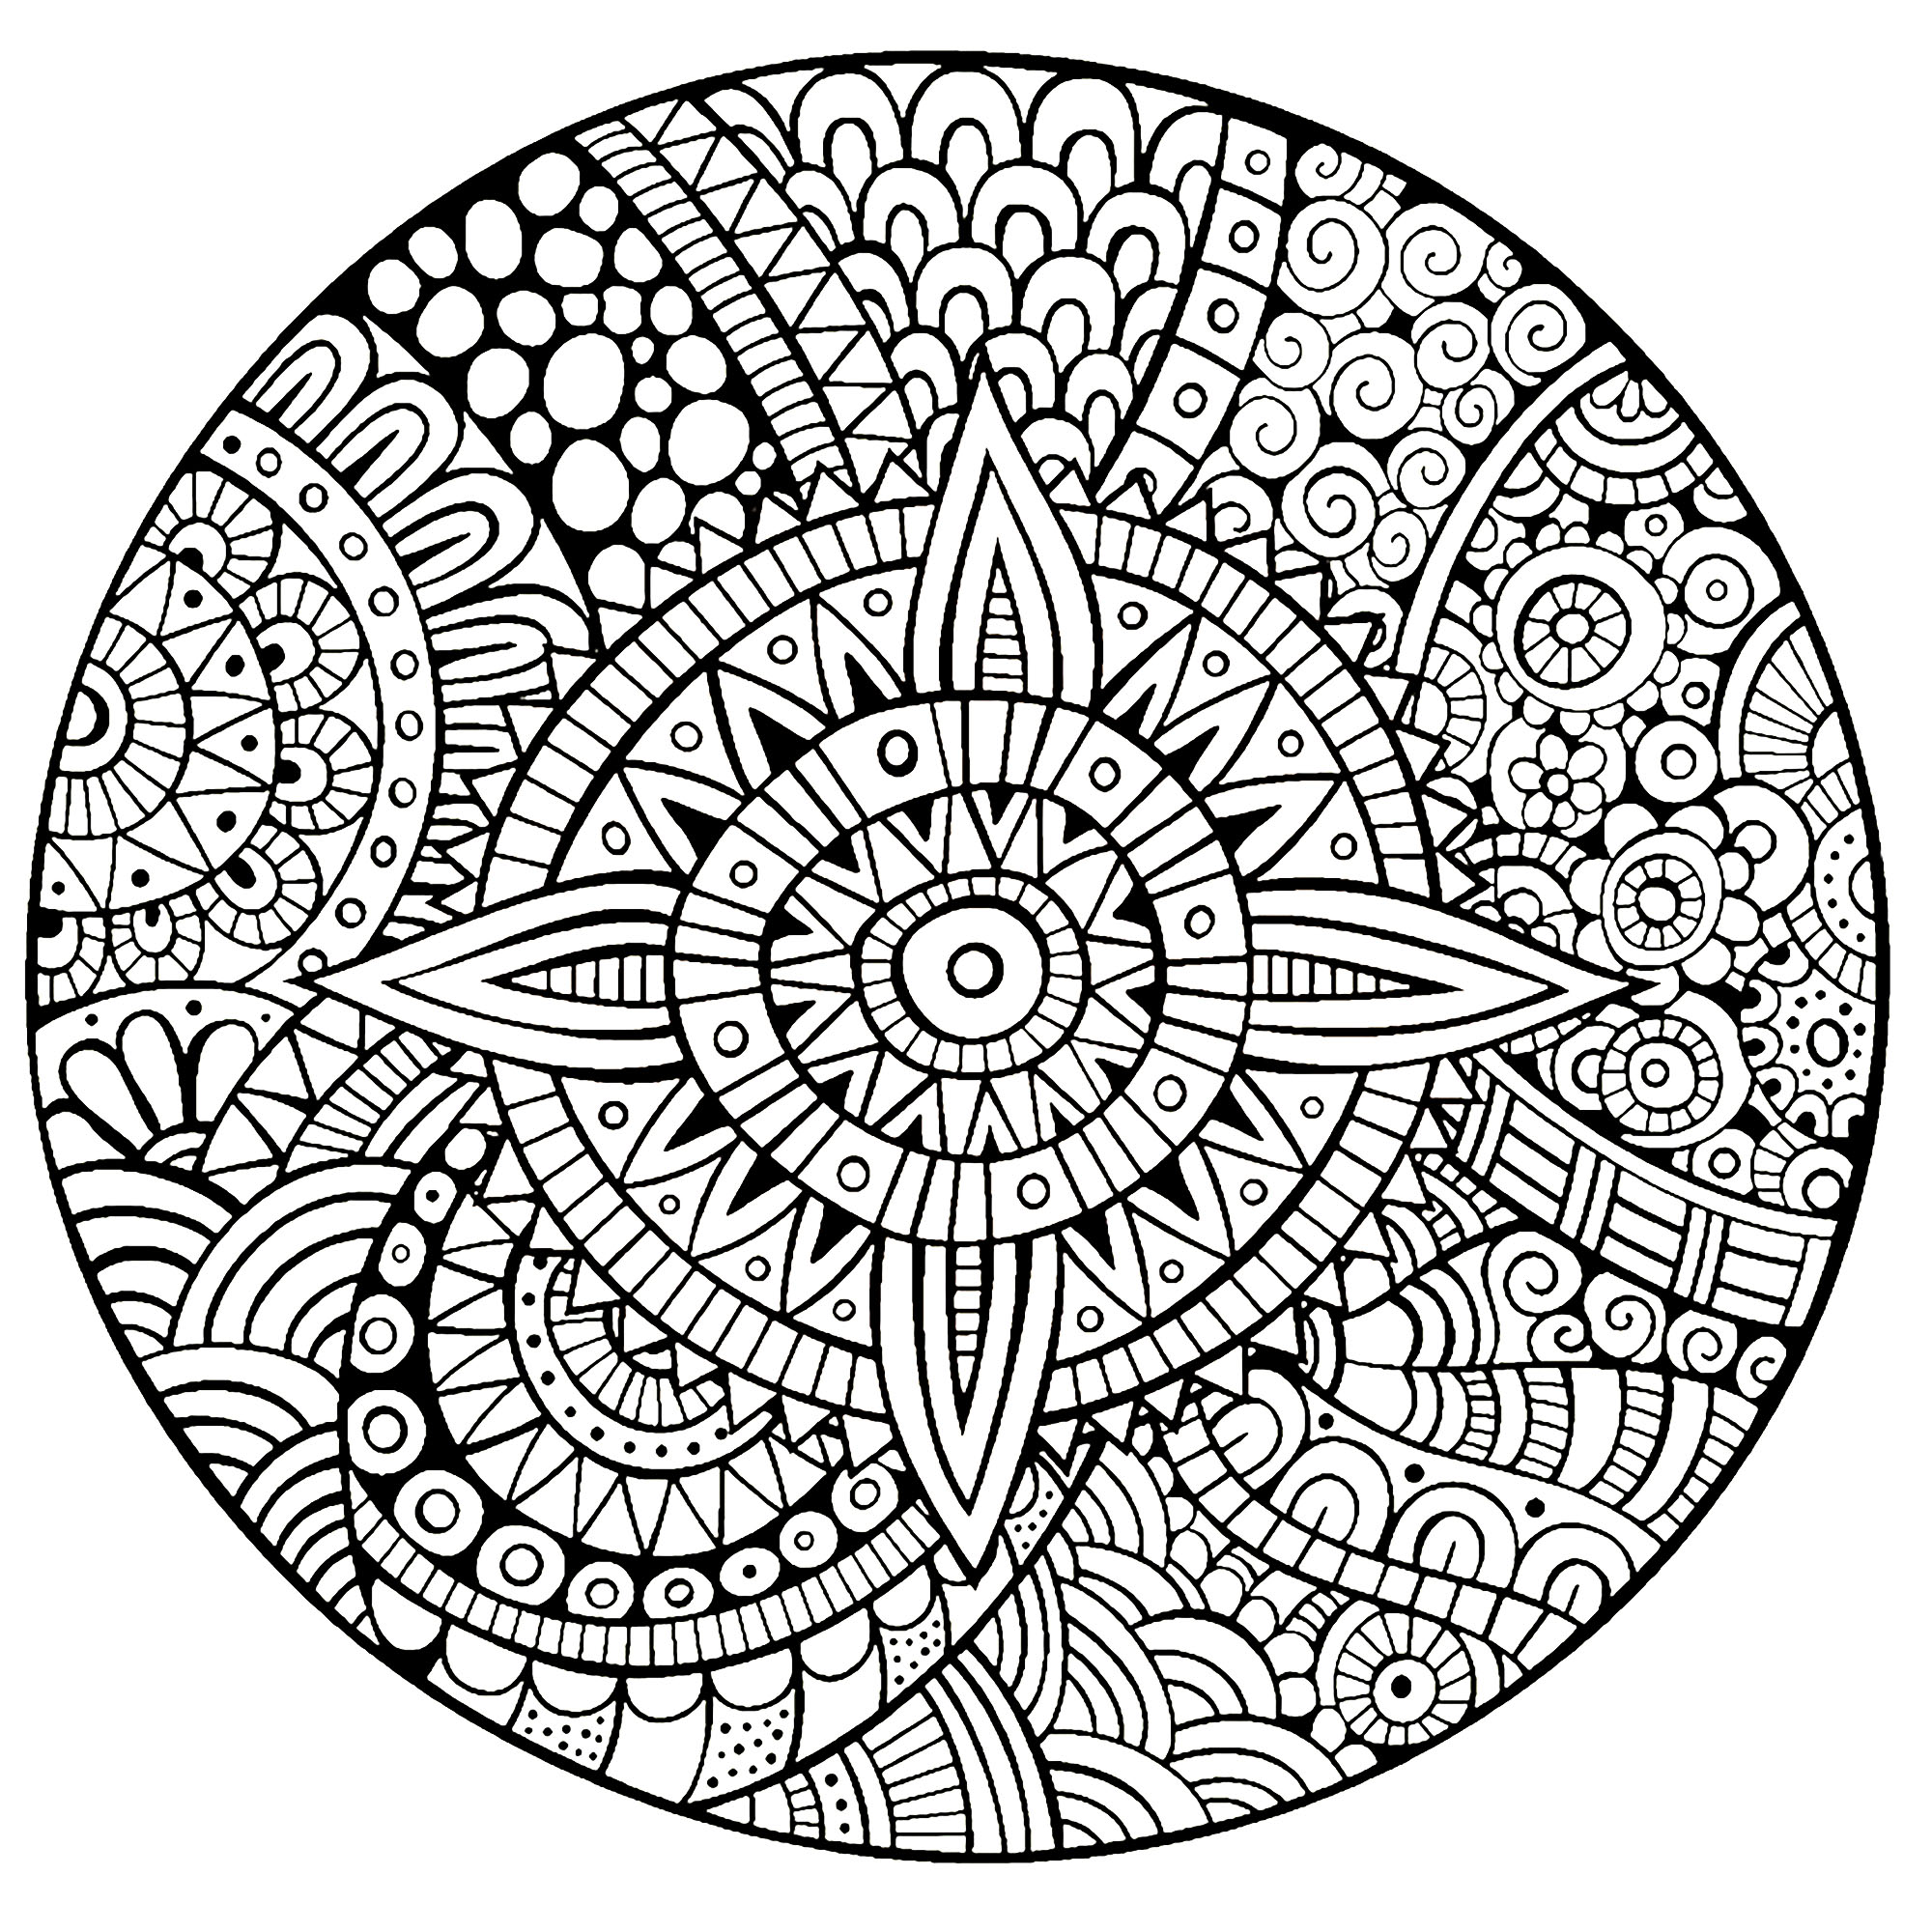 Download Mandala star thick lines - M&alas Adult Coloring Pages